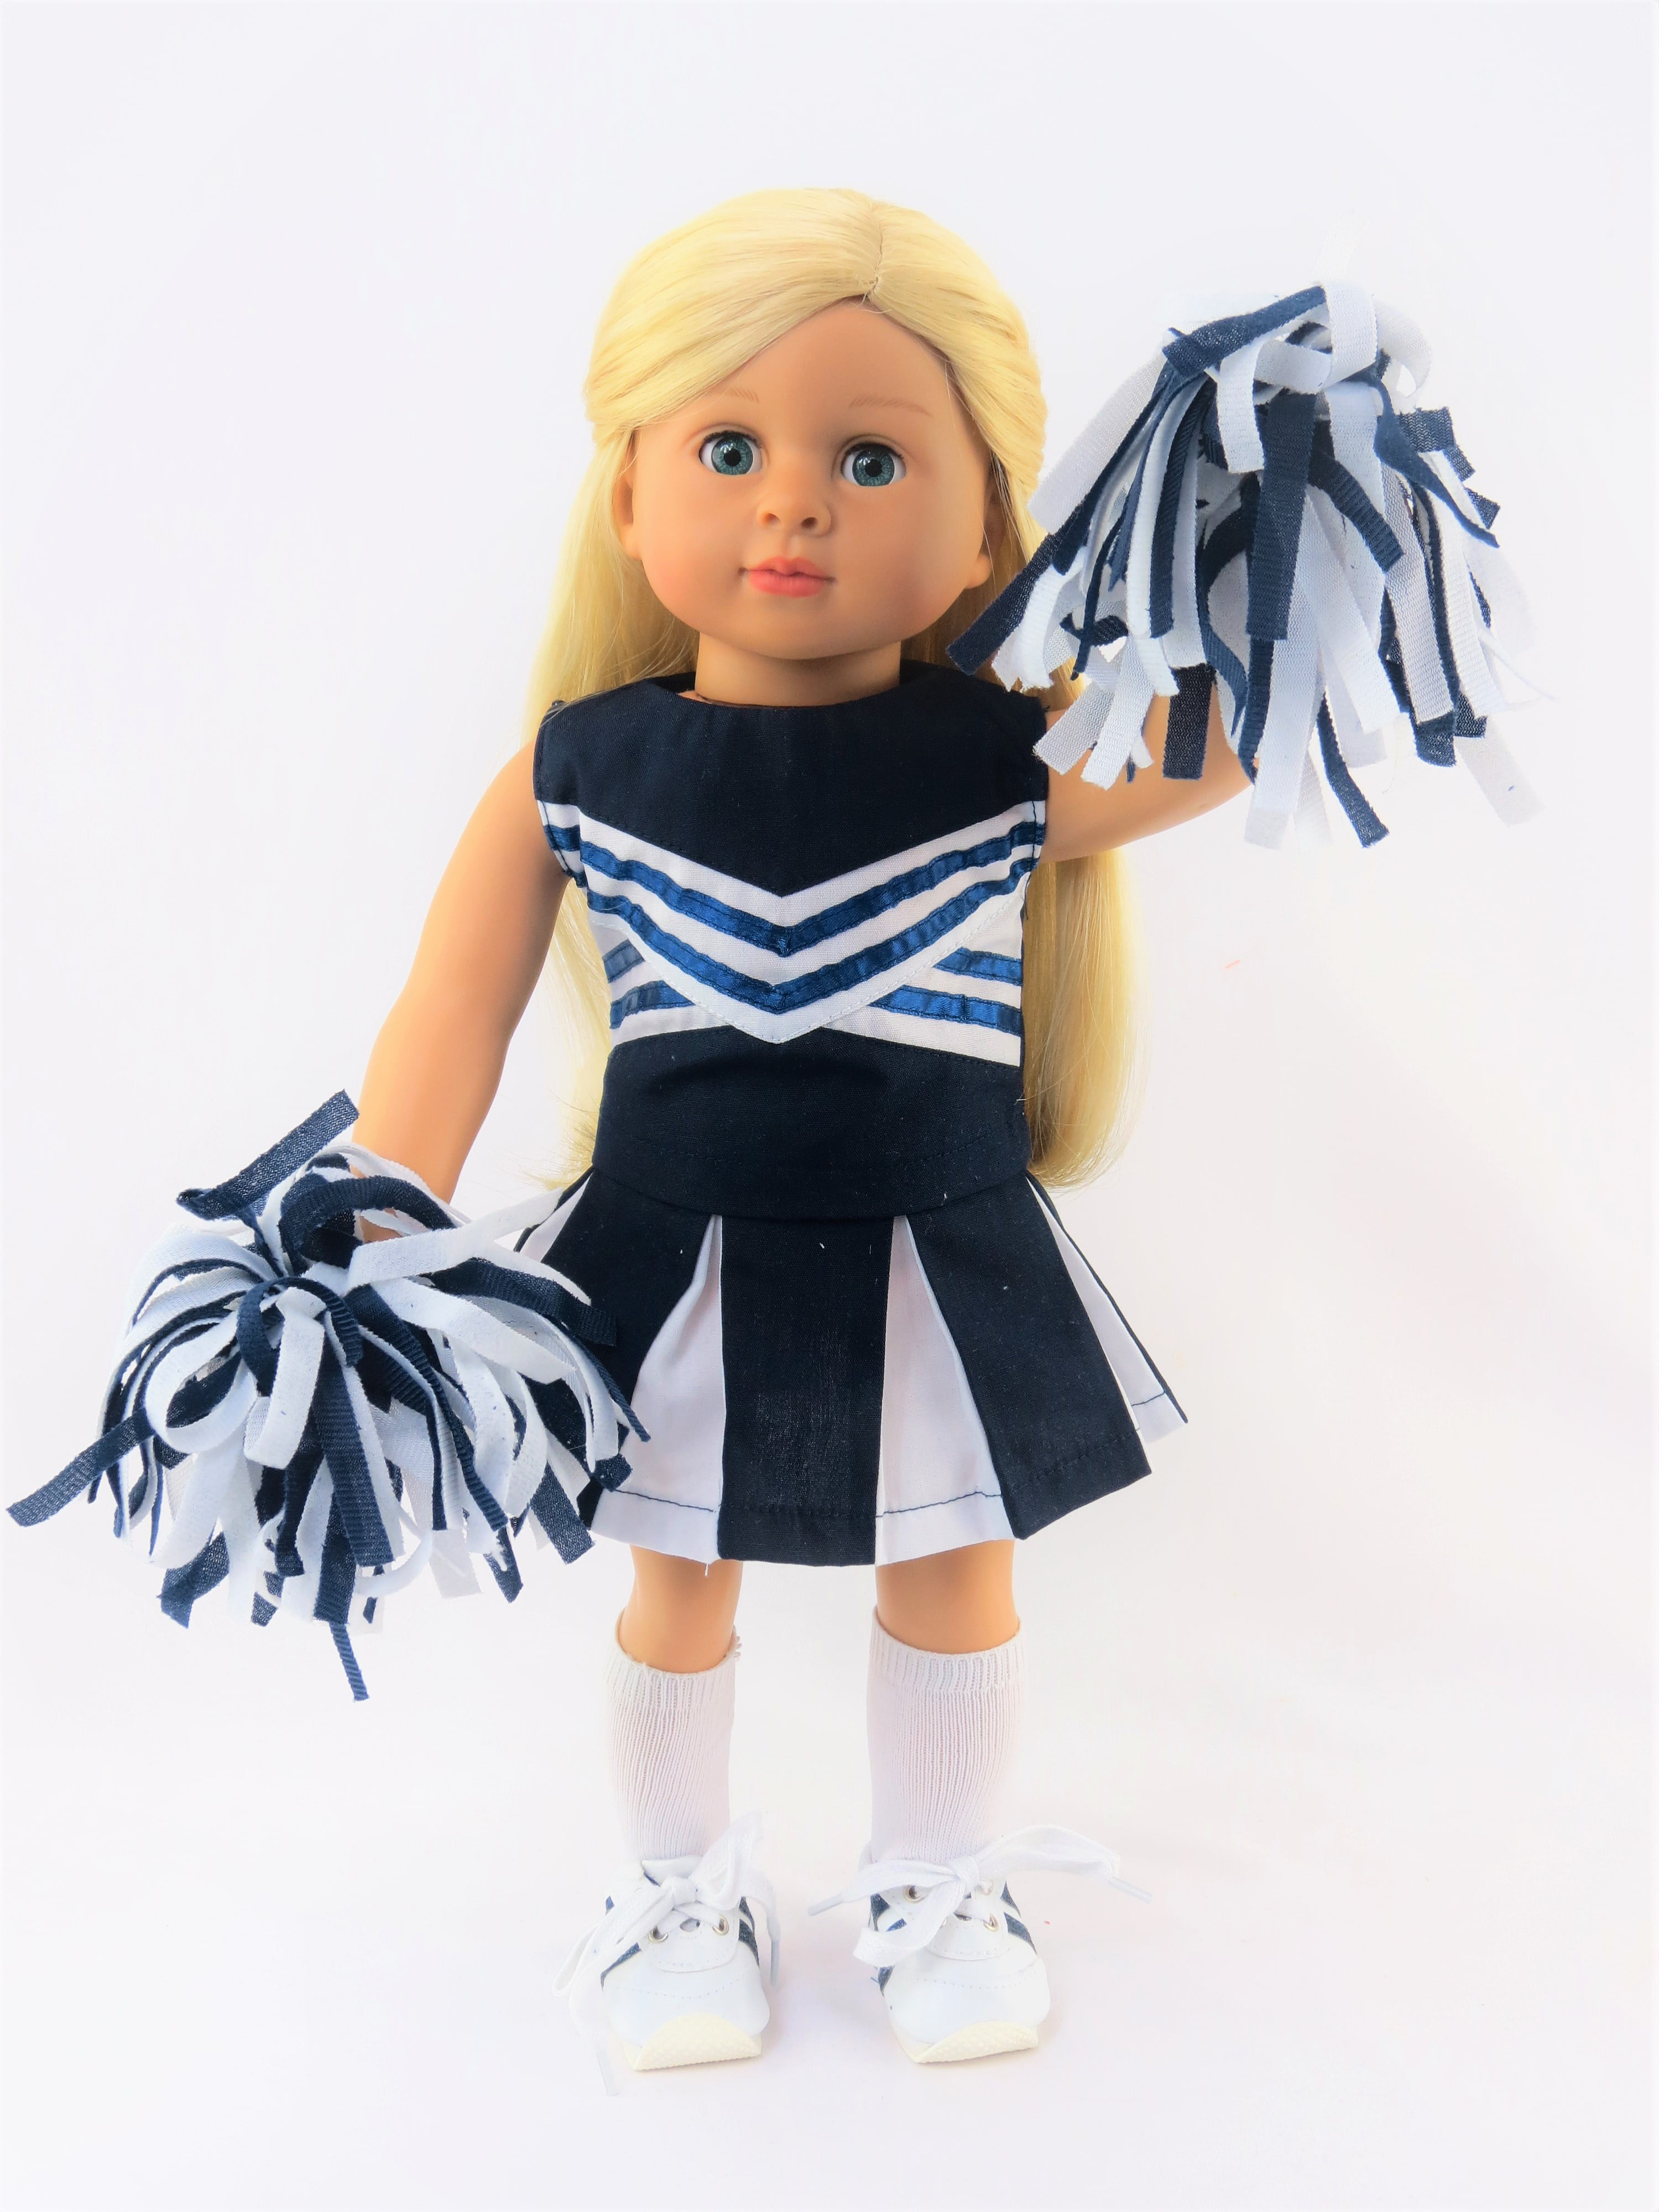 Red Cheerleader with Shoes and Accessories 6PCS For 18 inch dolls